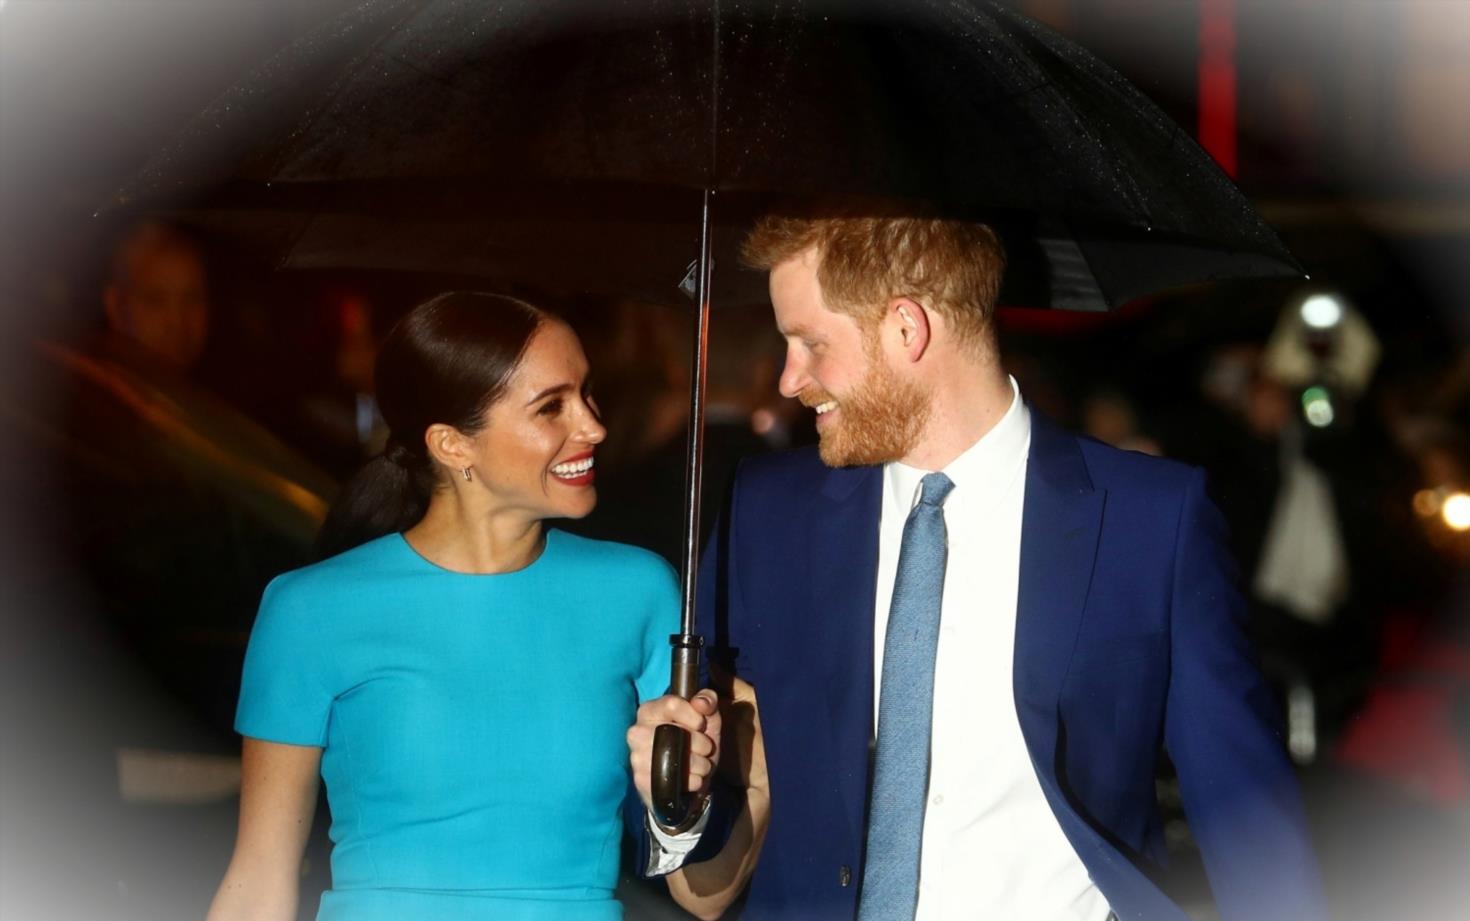 Meghan Markle Unsatisfied with Royal Response to Racism AllegationsnjgeFlfw 1